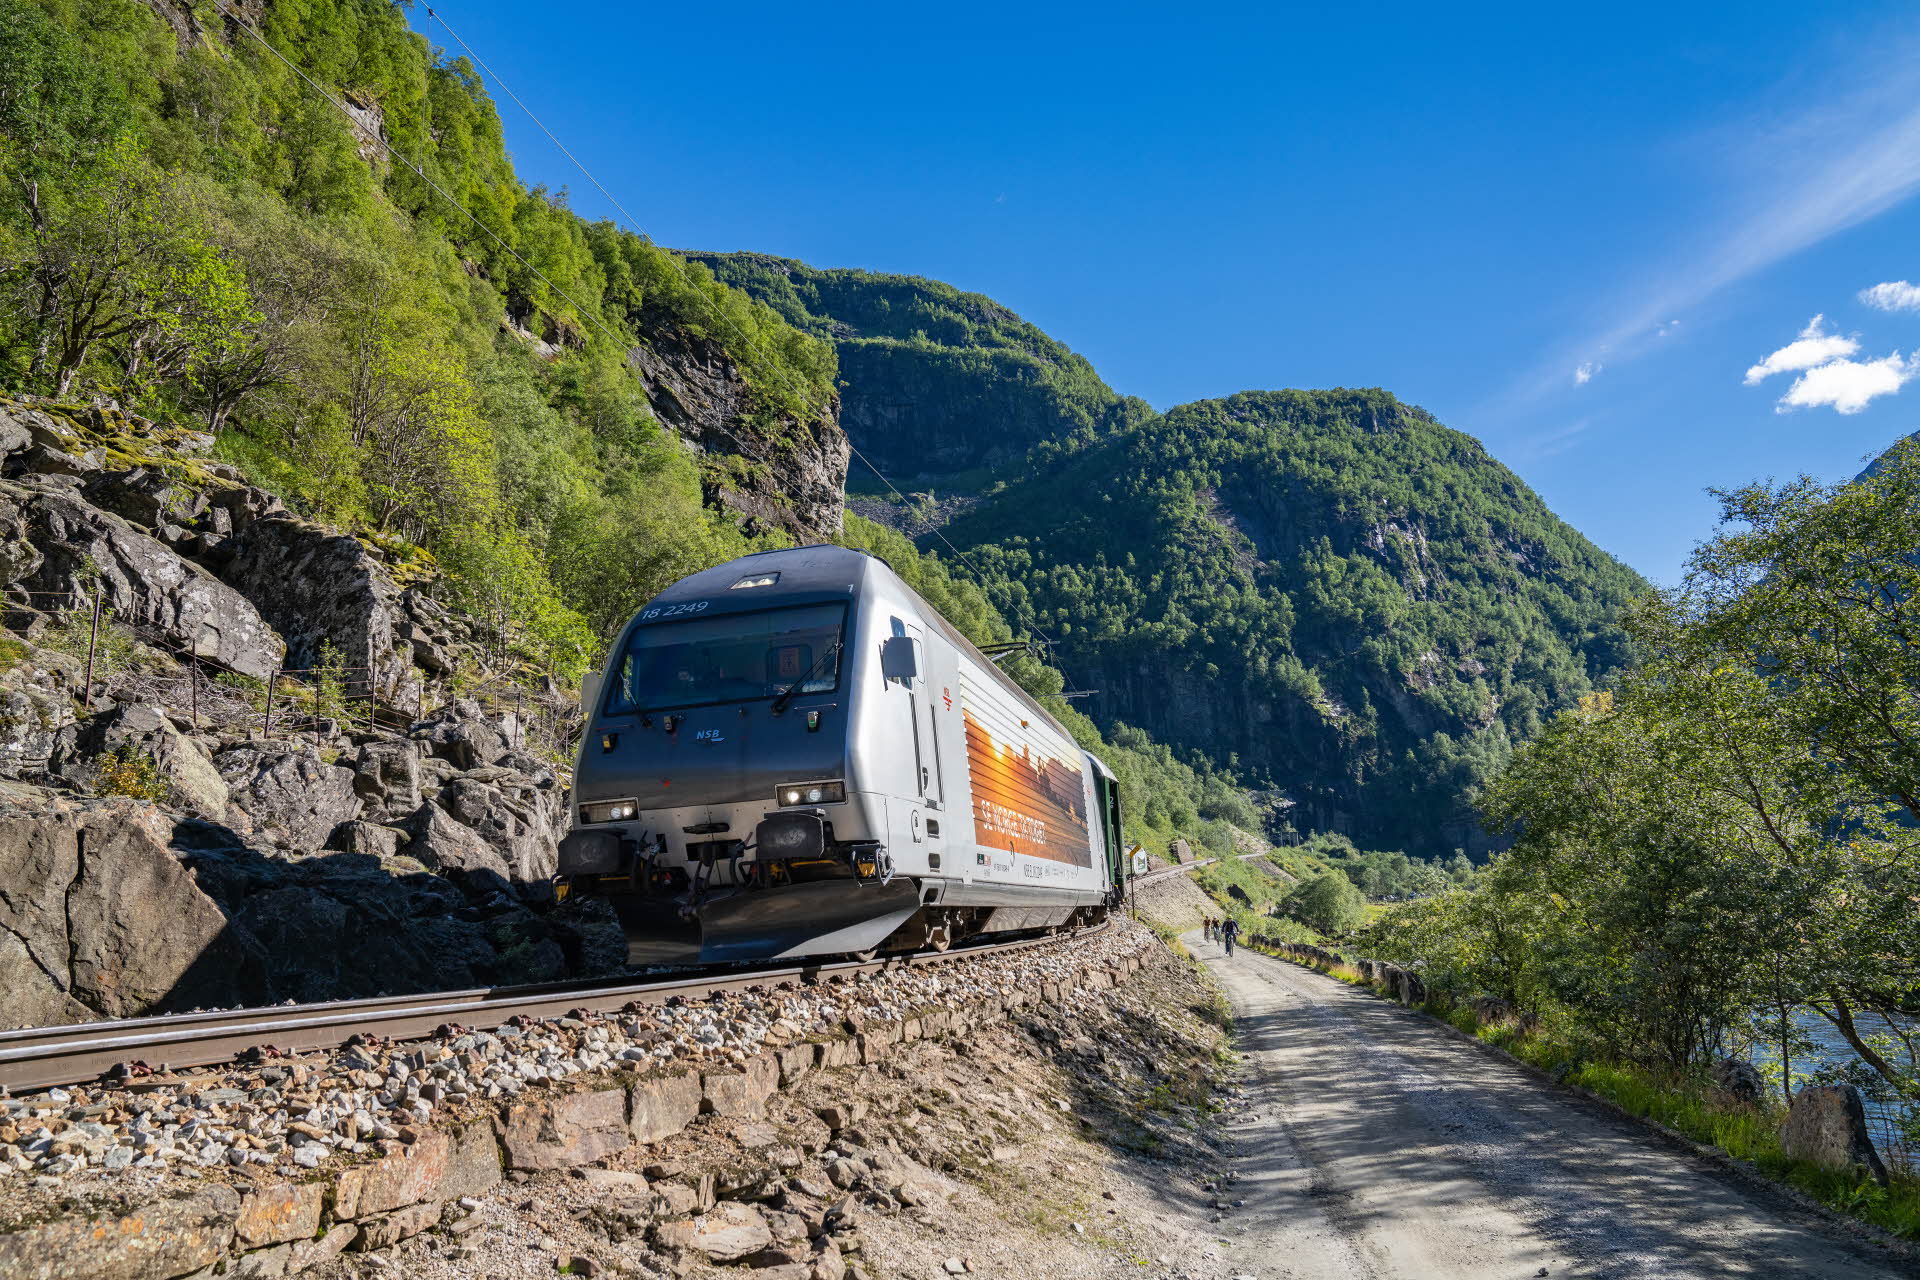 The Flåm Railway next to Rallarvegen surrounded by green trees and mountains 